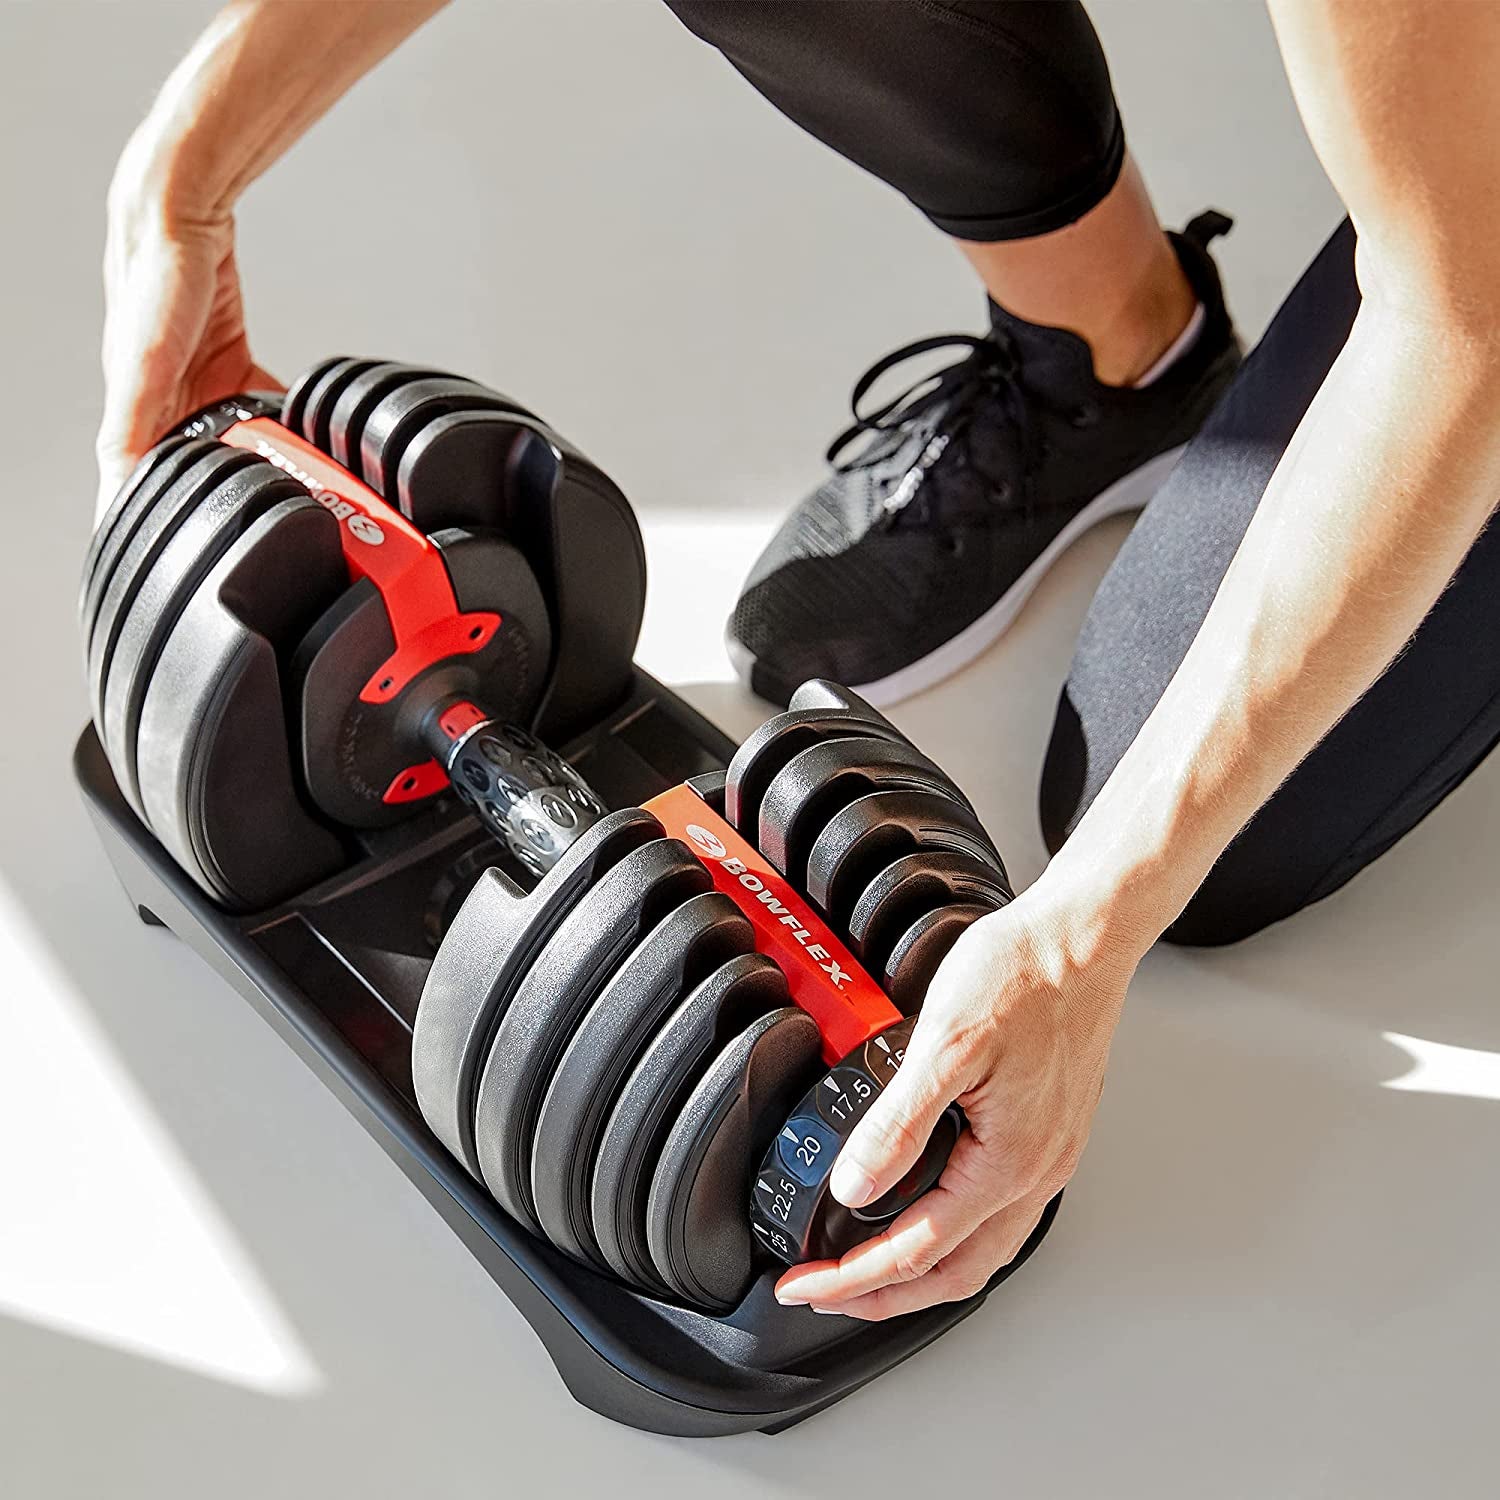 Top 5 Gym Accessories to Refresh Regularly - Origin Fitness